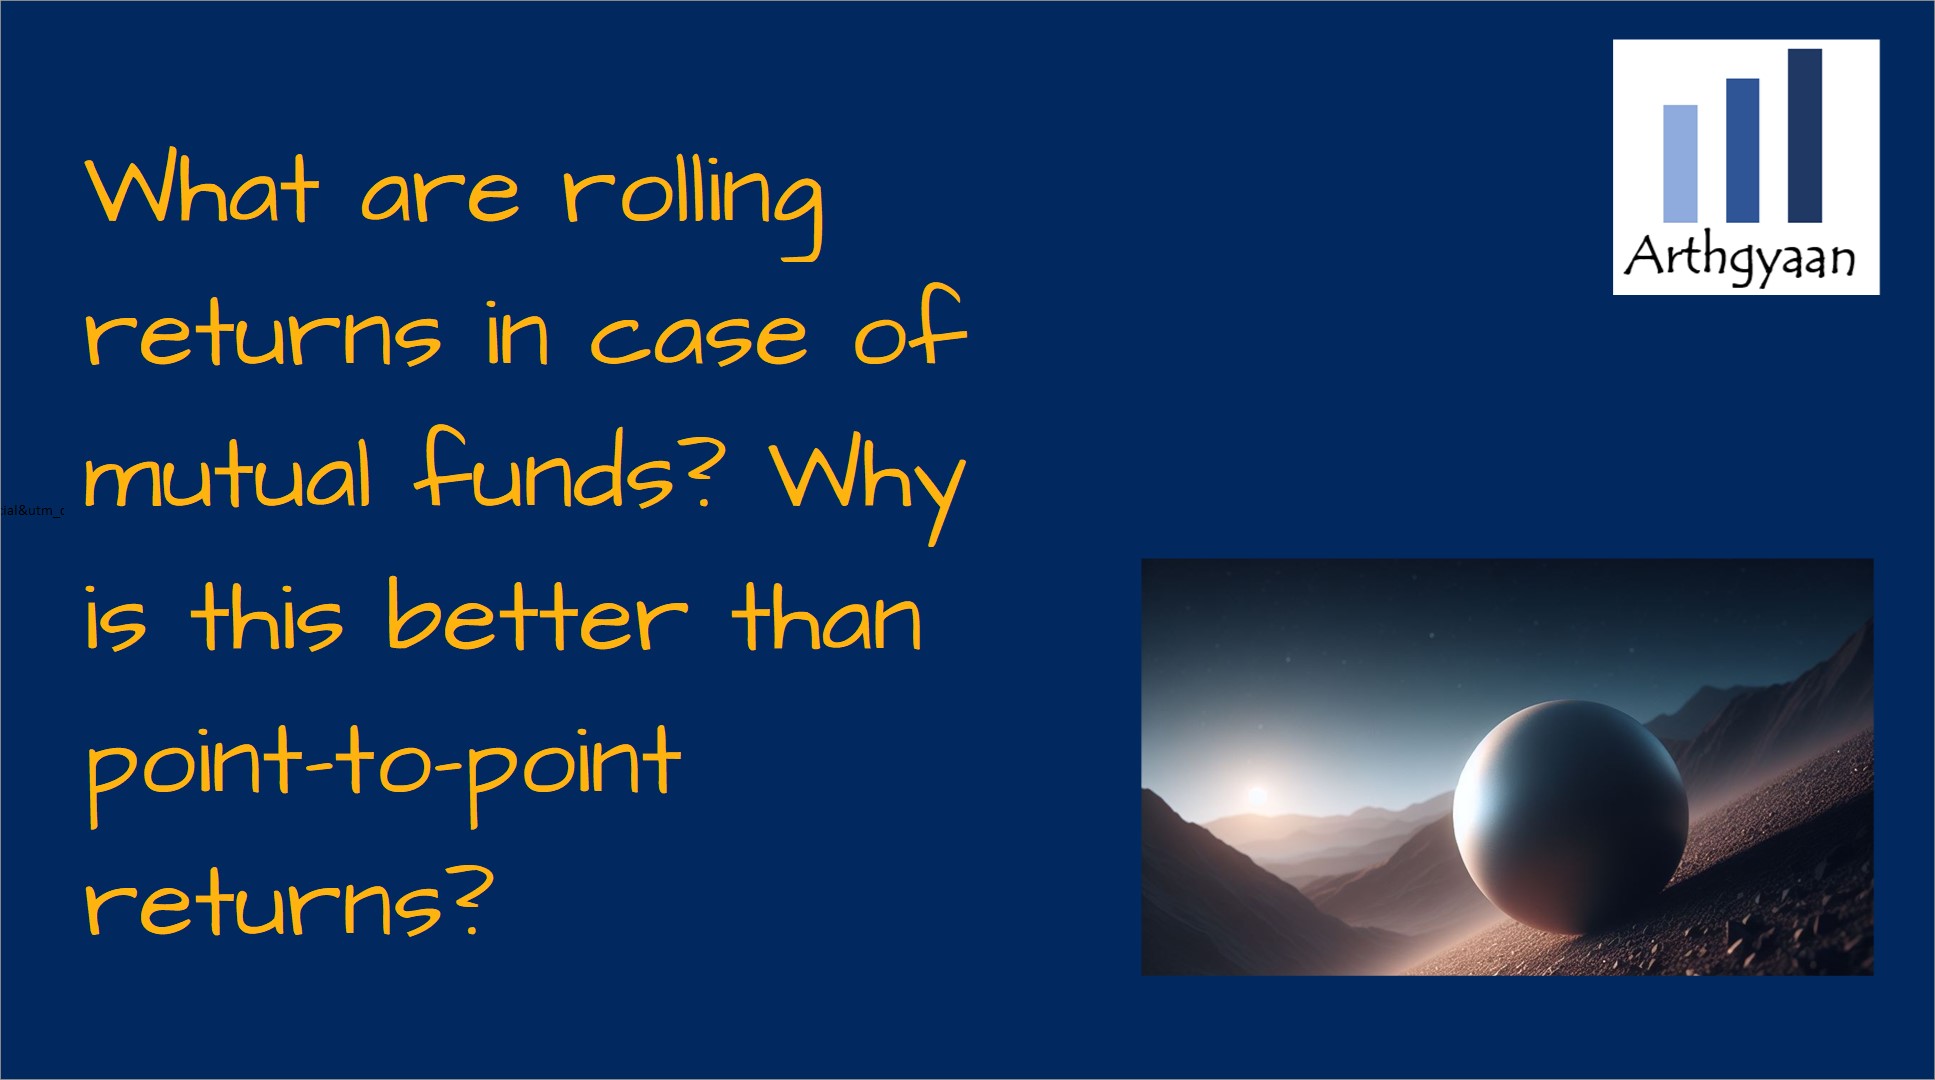 What are rolling returns in case of mutual funds? Why is this better than point-to-point returns?